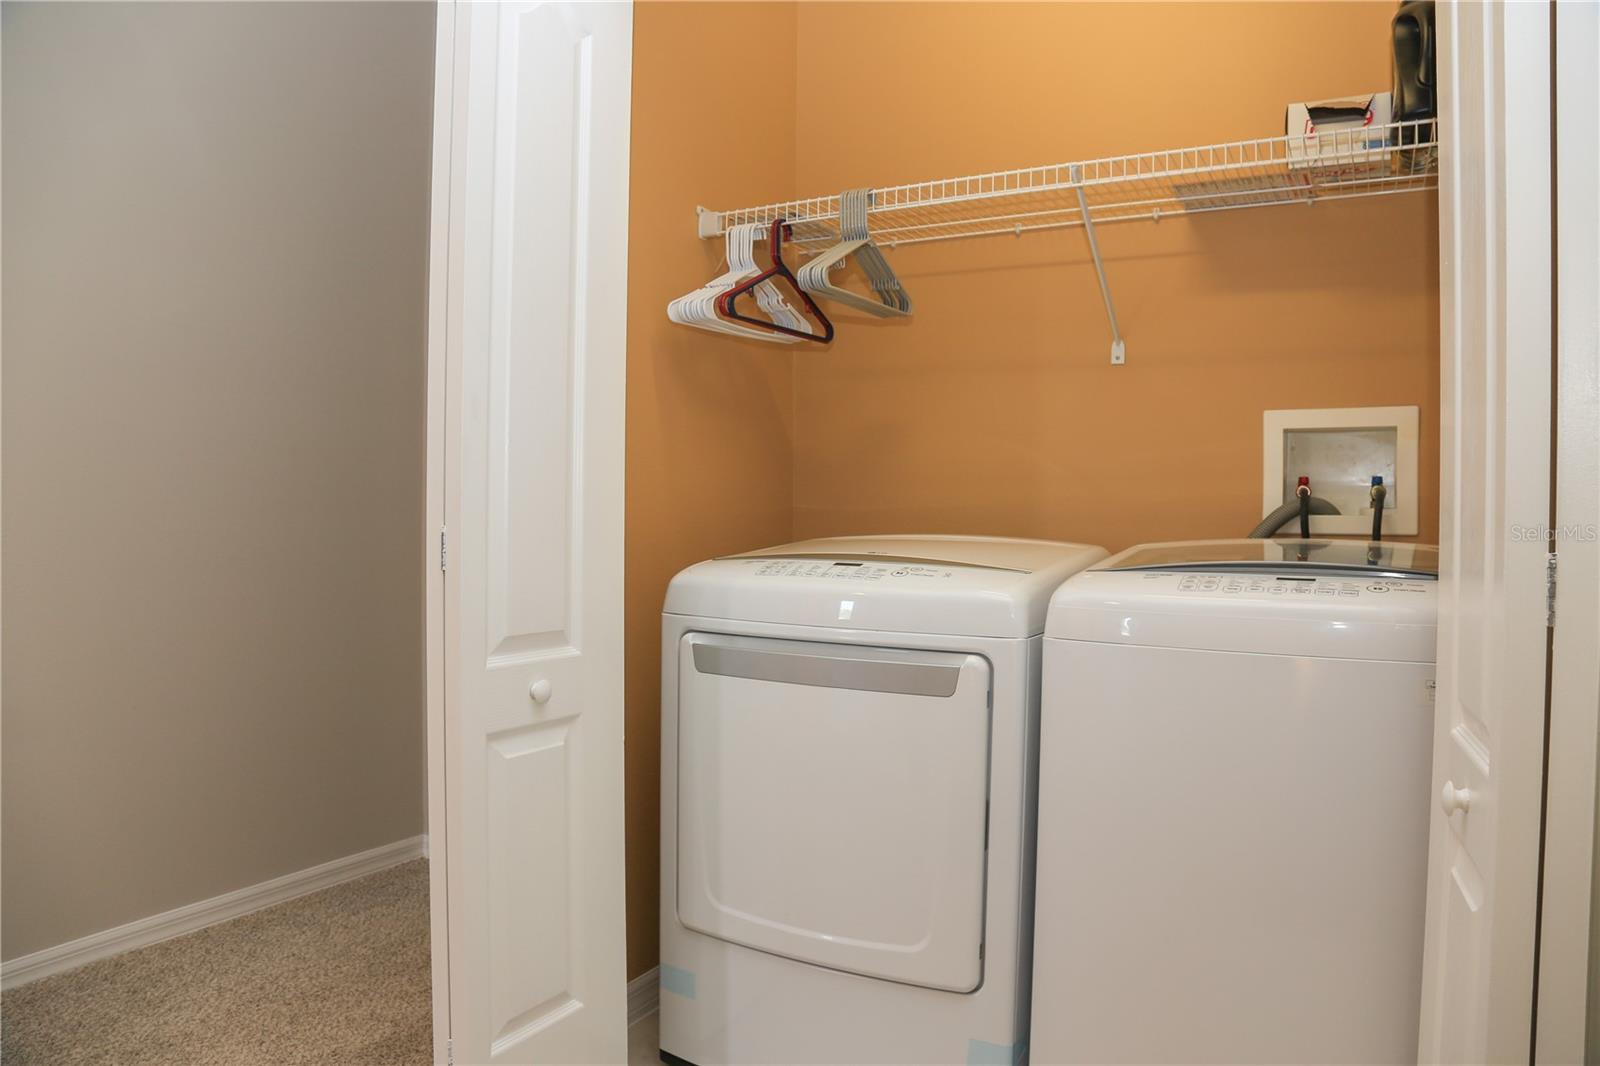 Laundry closet is conveniently located on the second floor